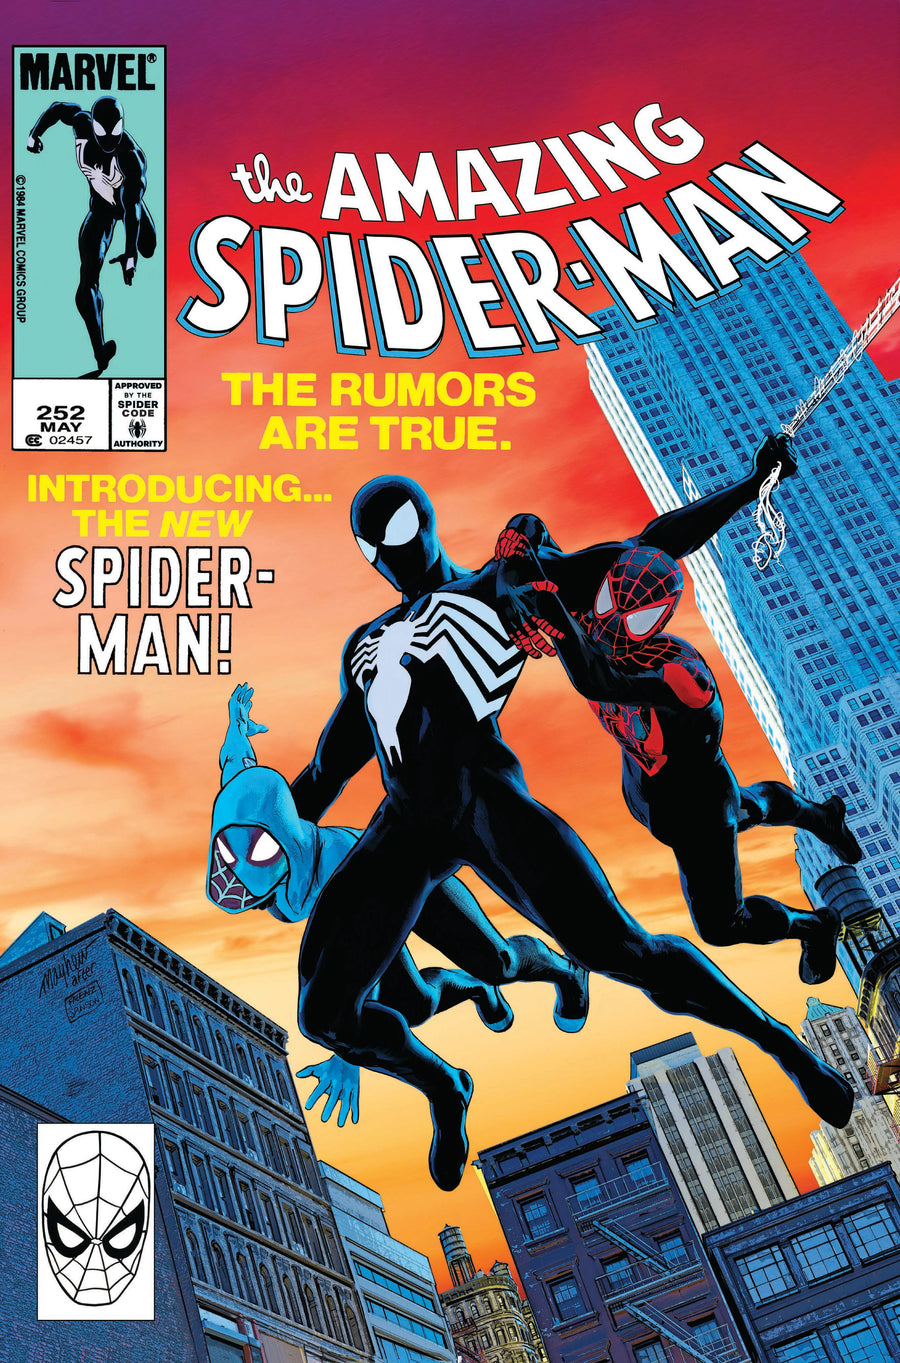 AMAZING SPIDER-MAN #252 FACSIMILE EDITION Mike Mayhew Studio Variant Cover A Trade Dress Raw